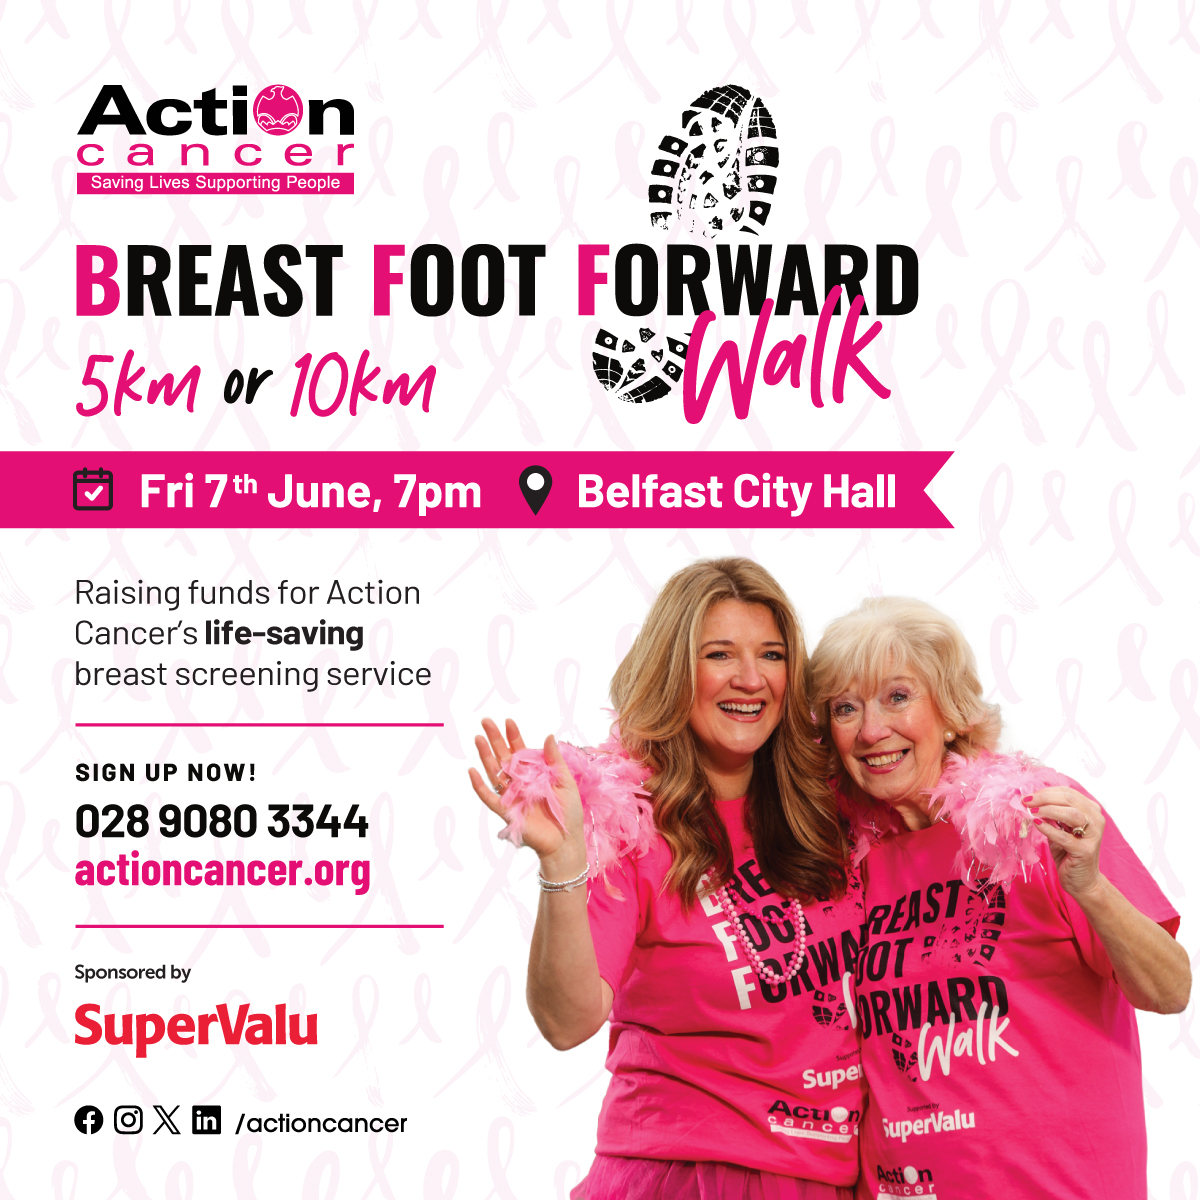 EARLY BIRD REGISTRATION IS OPEN! Offer until 30th April🎫Adult £10 & Child £5. Early bird sign-ups have the chance to win an overnight stay at a local hotel!🏨 ✍️Sign-up at actioncancer.org Our Breast Foot Forward Walk is kindly sponsored by @SuperValuNI #BFFwalk